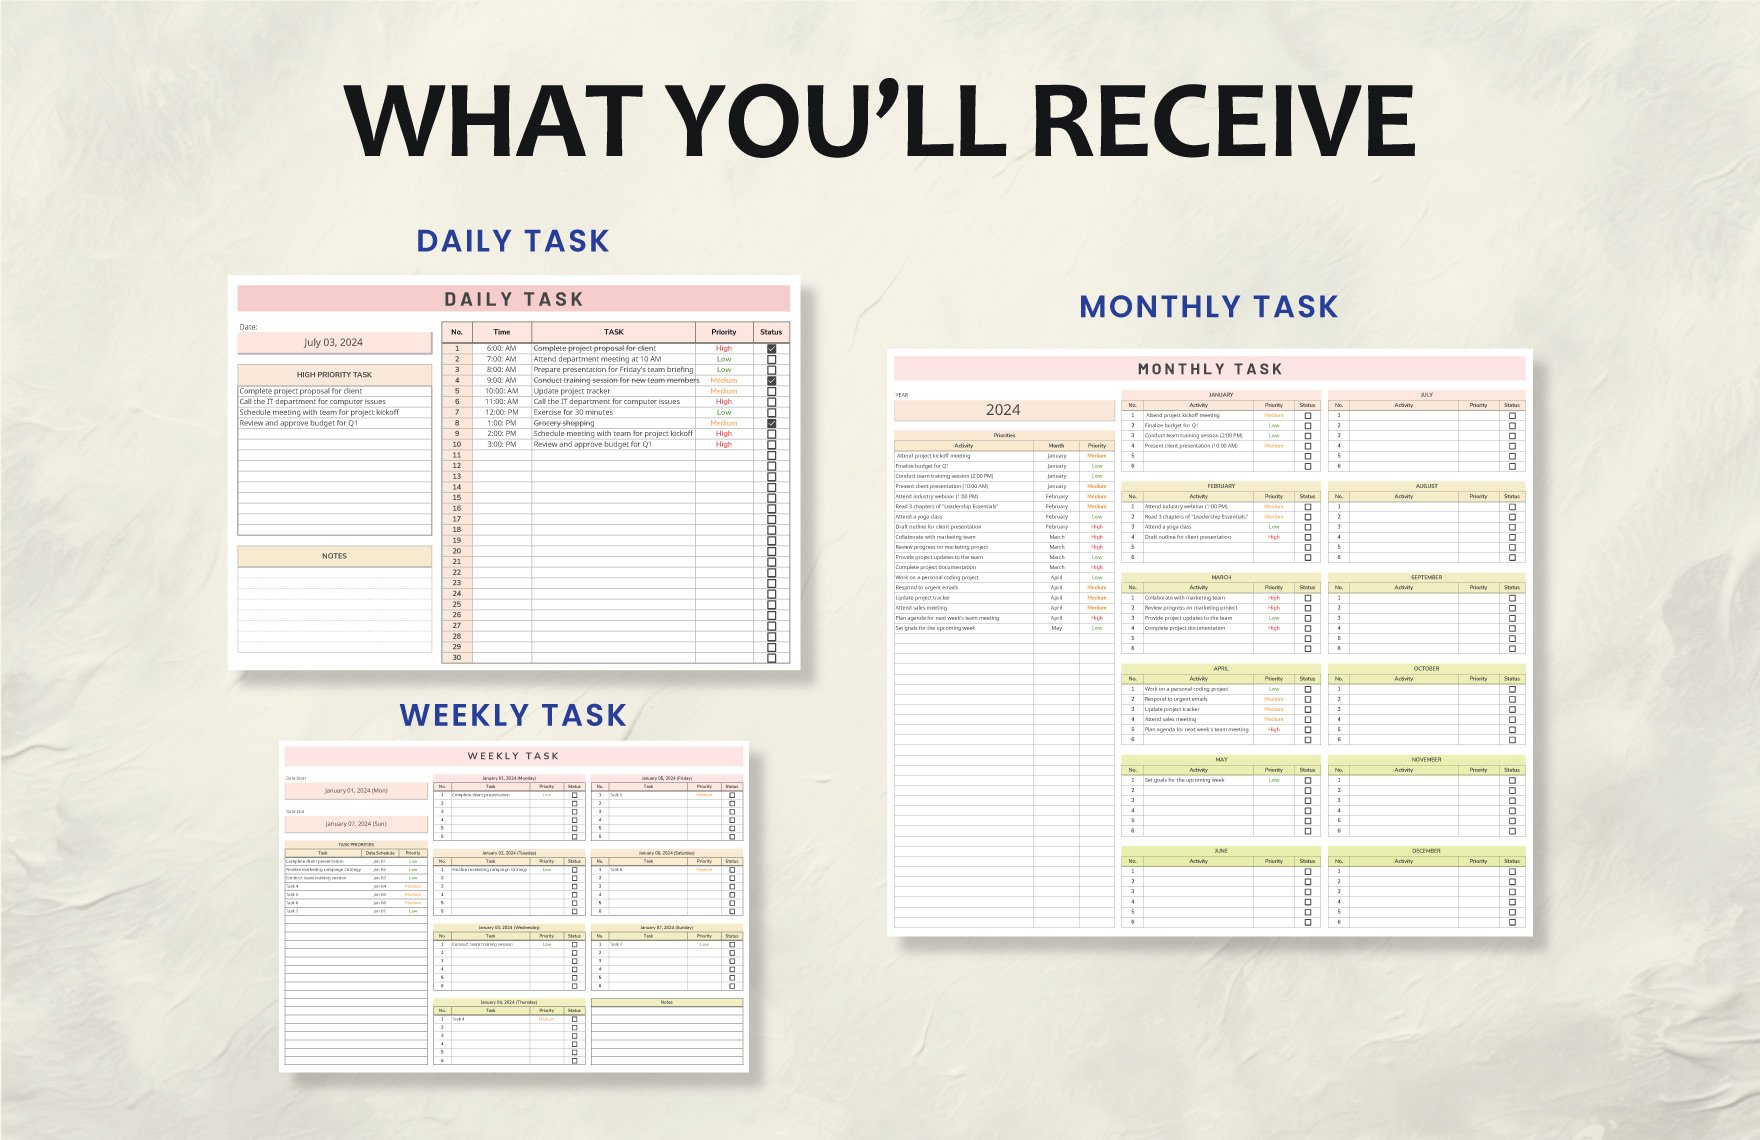 Daily Weekly Monthly Task List Template